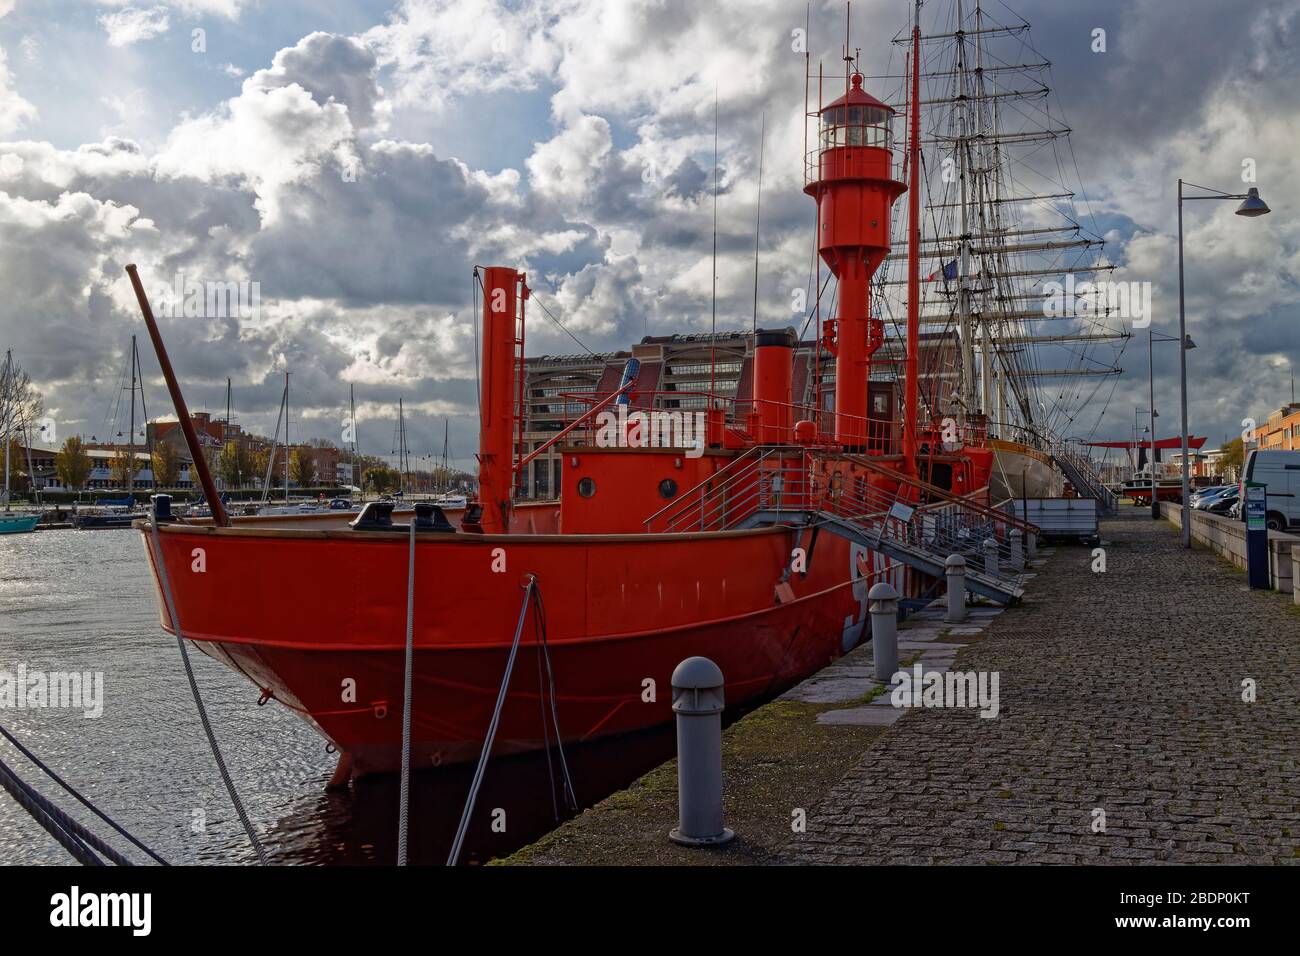 The Sandettie, a red painted old Lightship moored up at the Port of Dunkirk Nautical Museum in the central harbour. Stock Photo